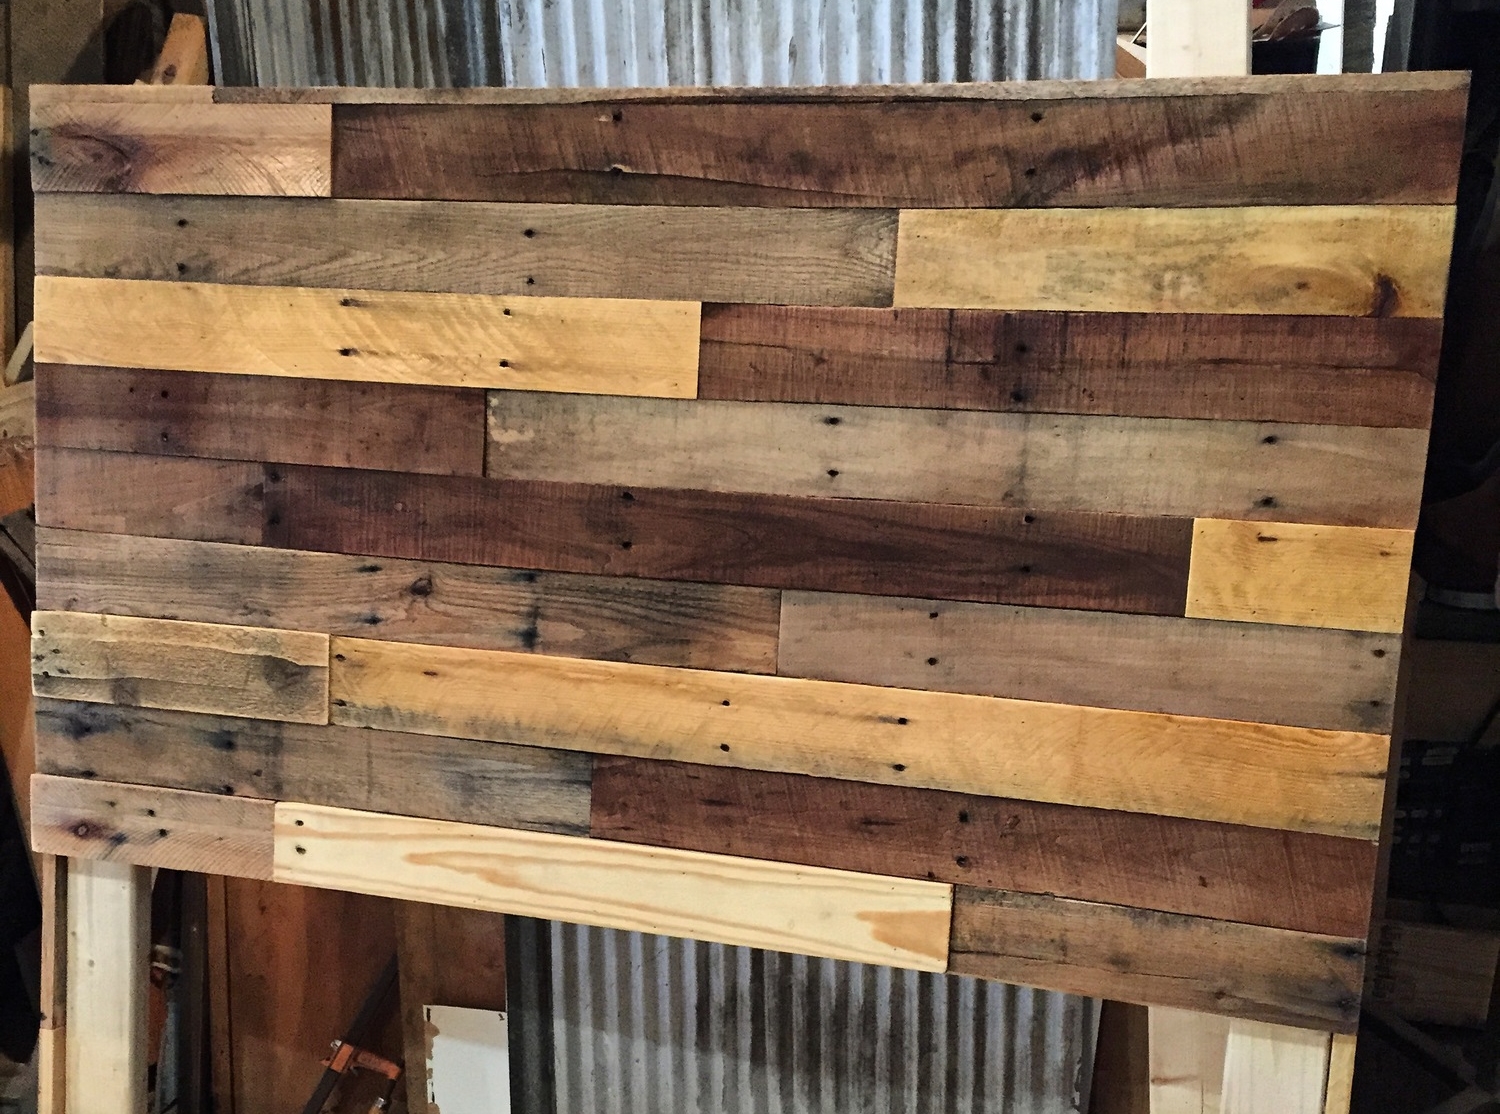 Pallet Wood Headboard Diy Revival, How To Make A Bed Frame Out Of Pallet Wood